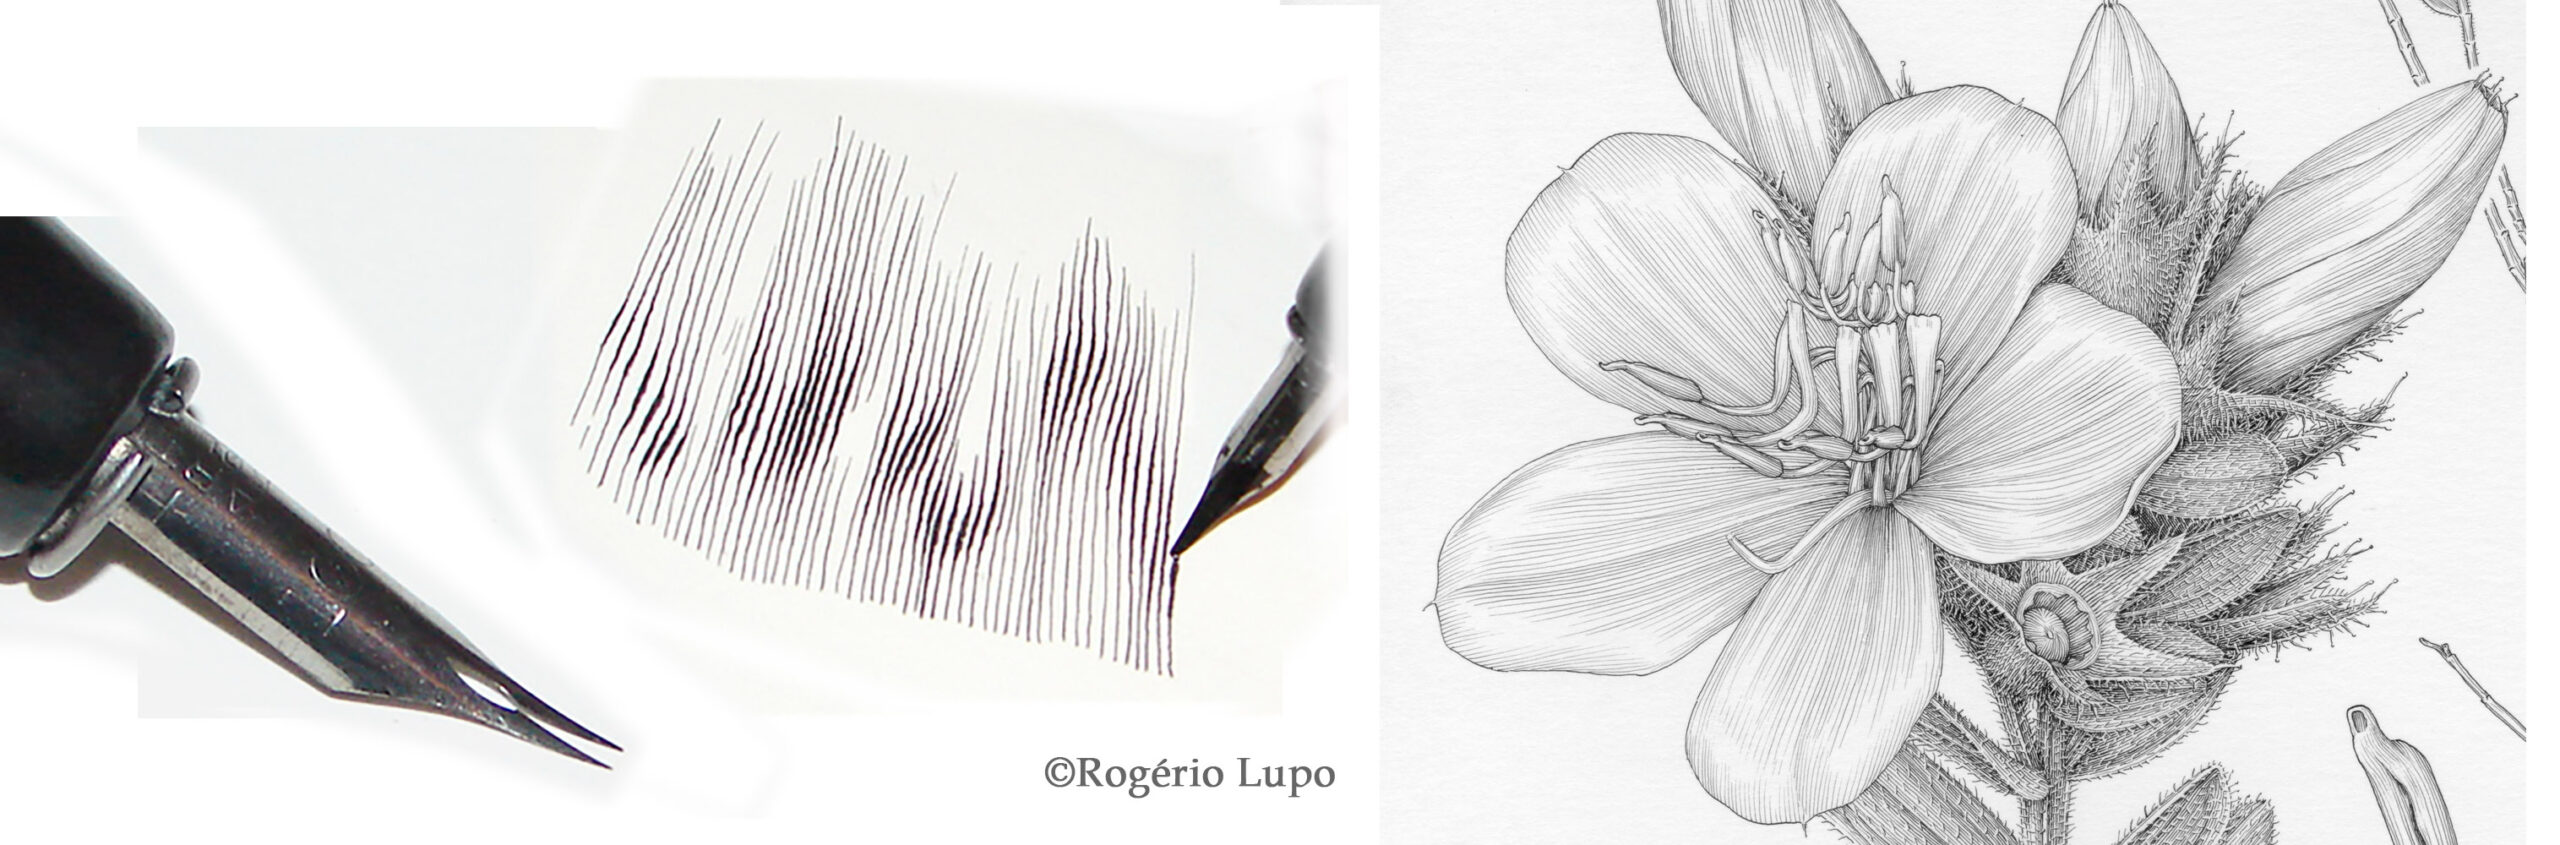 Refined Hatching with Pen Nib & Ink Rogerio Lupo